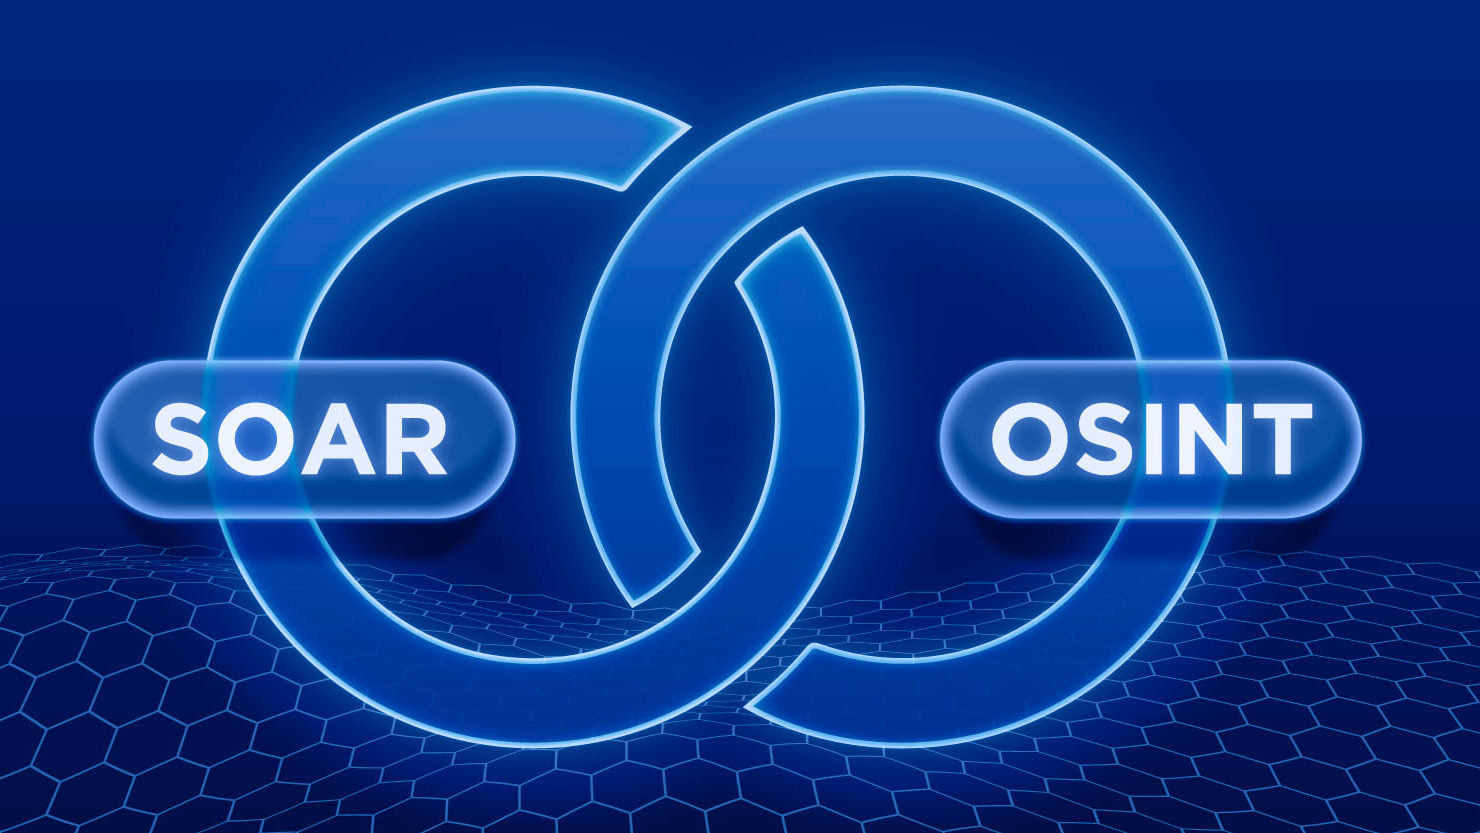 How SOAR and OSINT Work Together